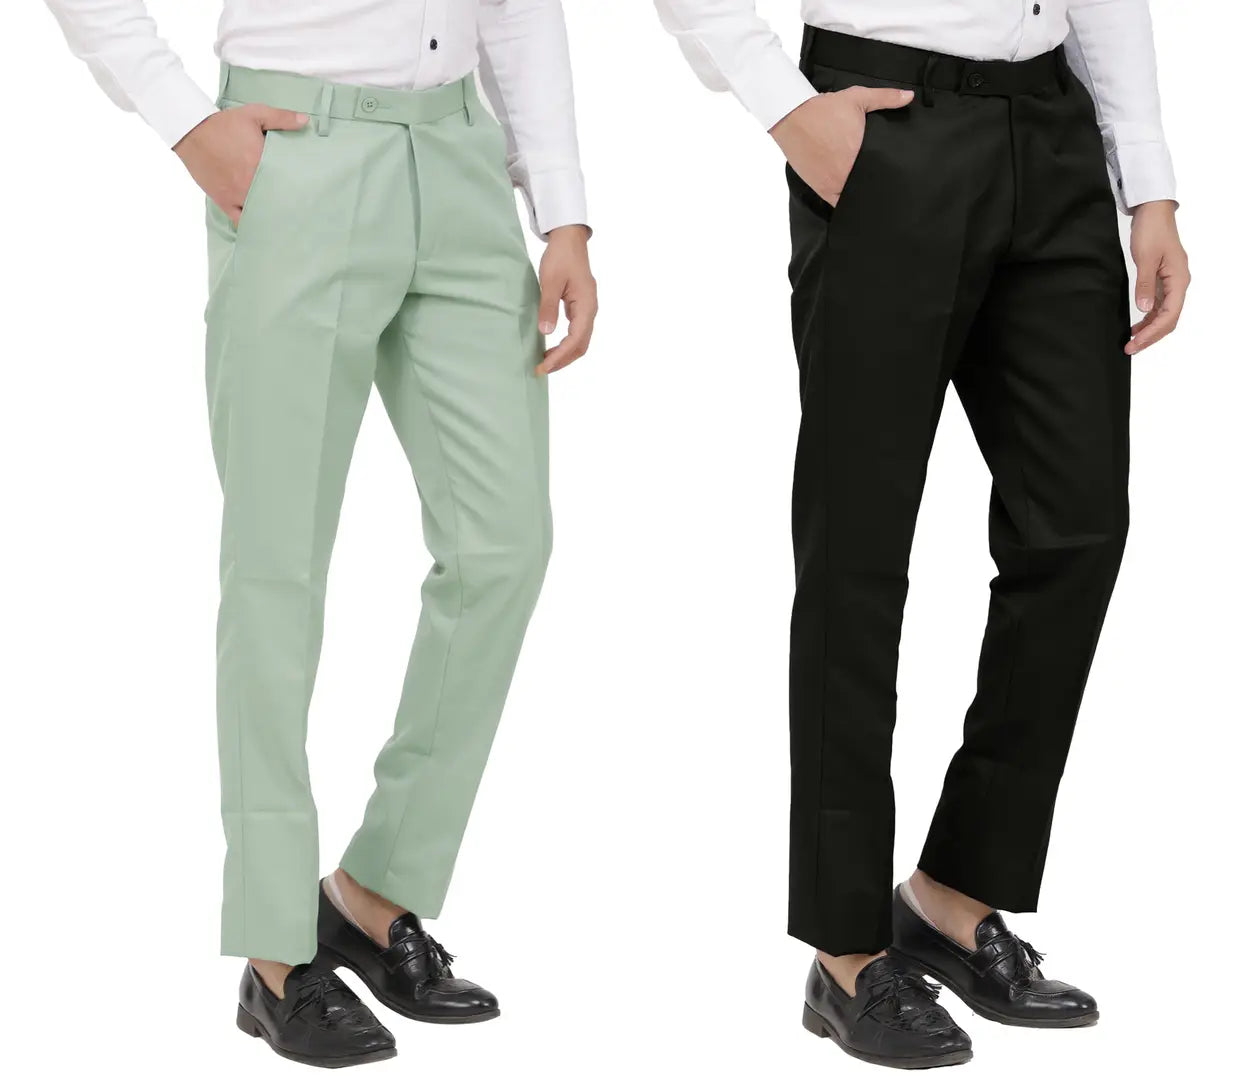 Kundan Men Poly-Viscose Blended Olive Green and Black Formal Trousers ( Pack of 2 Trousers )